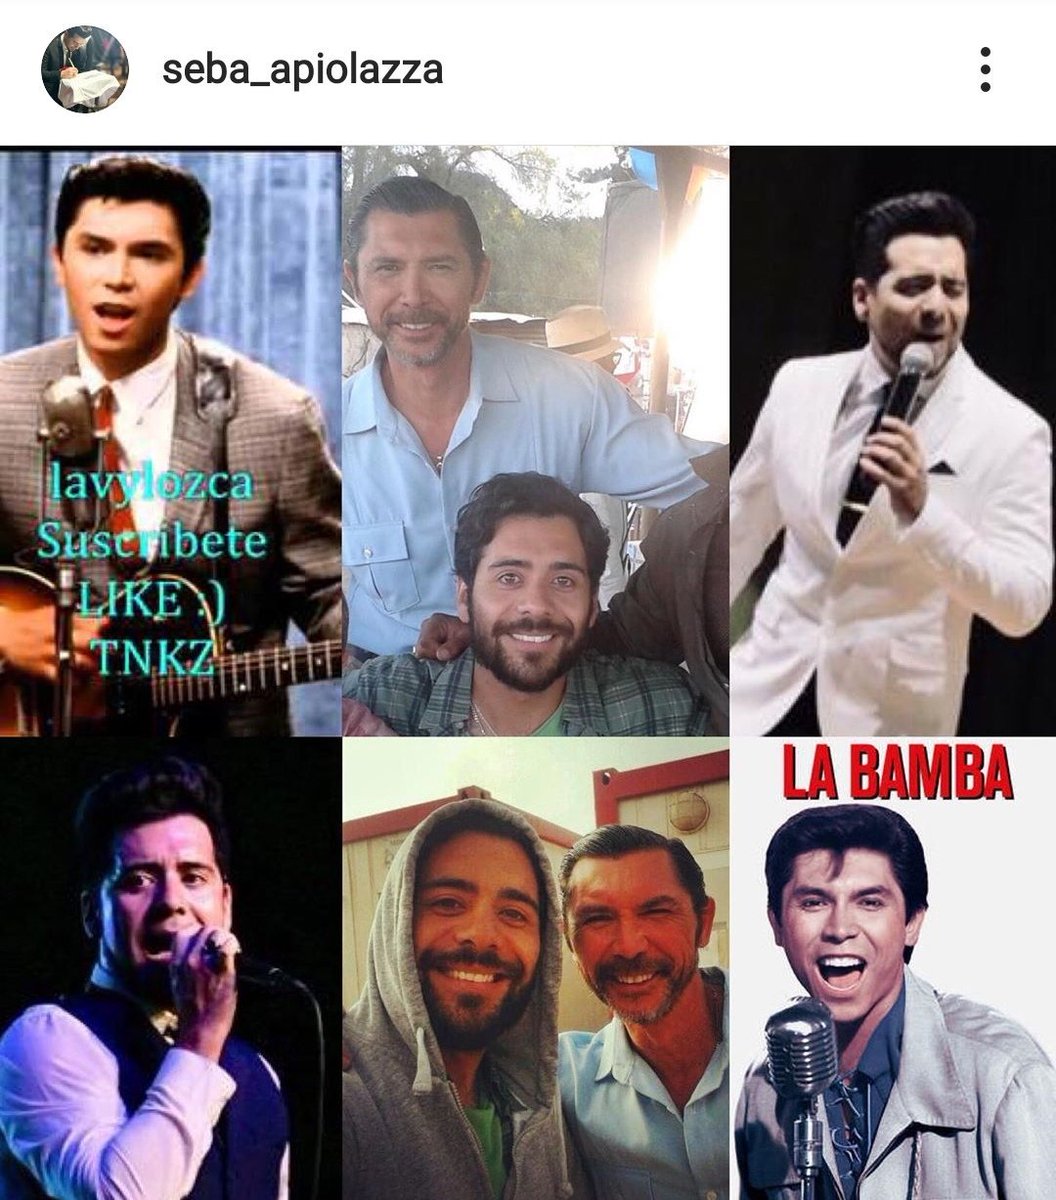 I'm back...as a singer #lifeismagic @TheRamblersOfic rockandroll @LouDPhillips #inspirational He vuelto y cantando #rocknroll